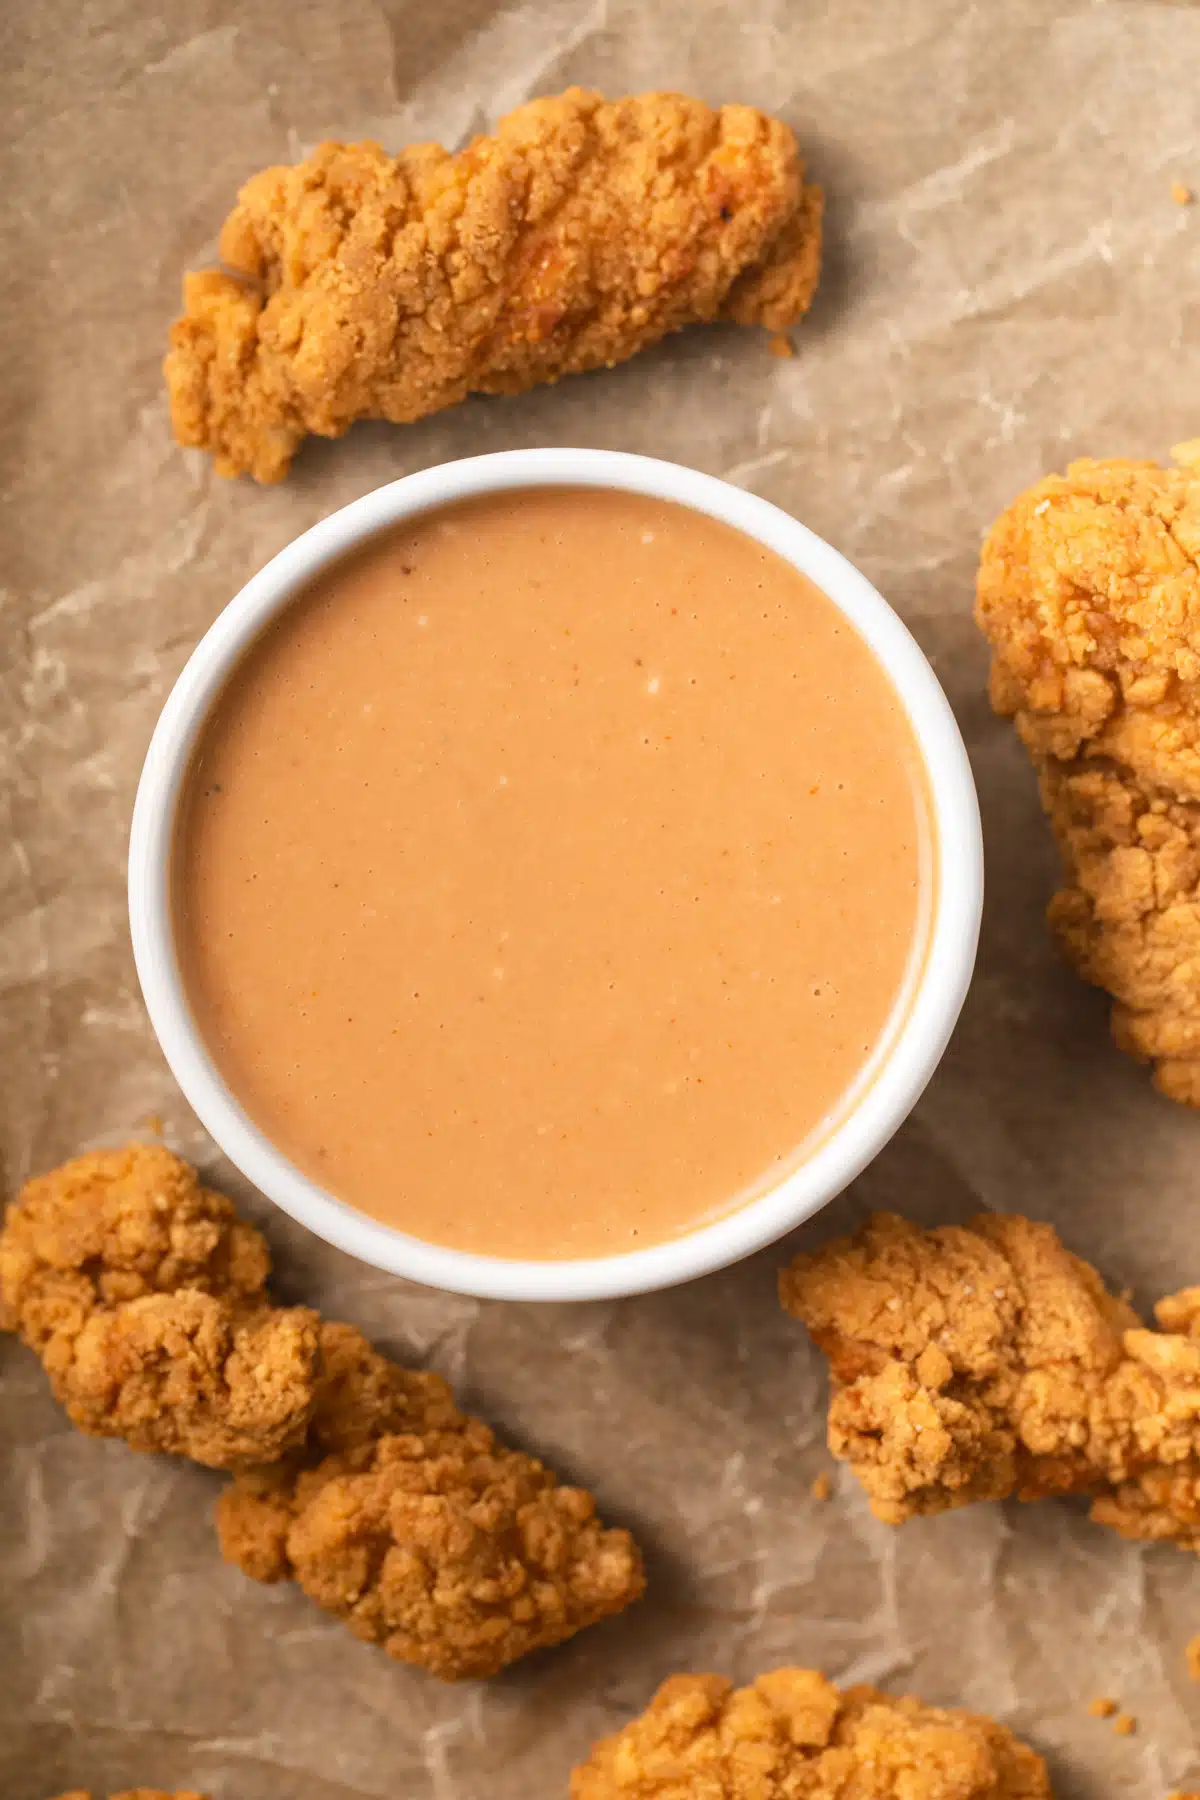 Chicken nugget dipping sauce in white bowl.